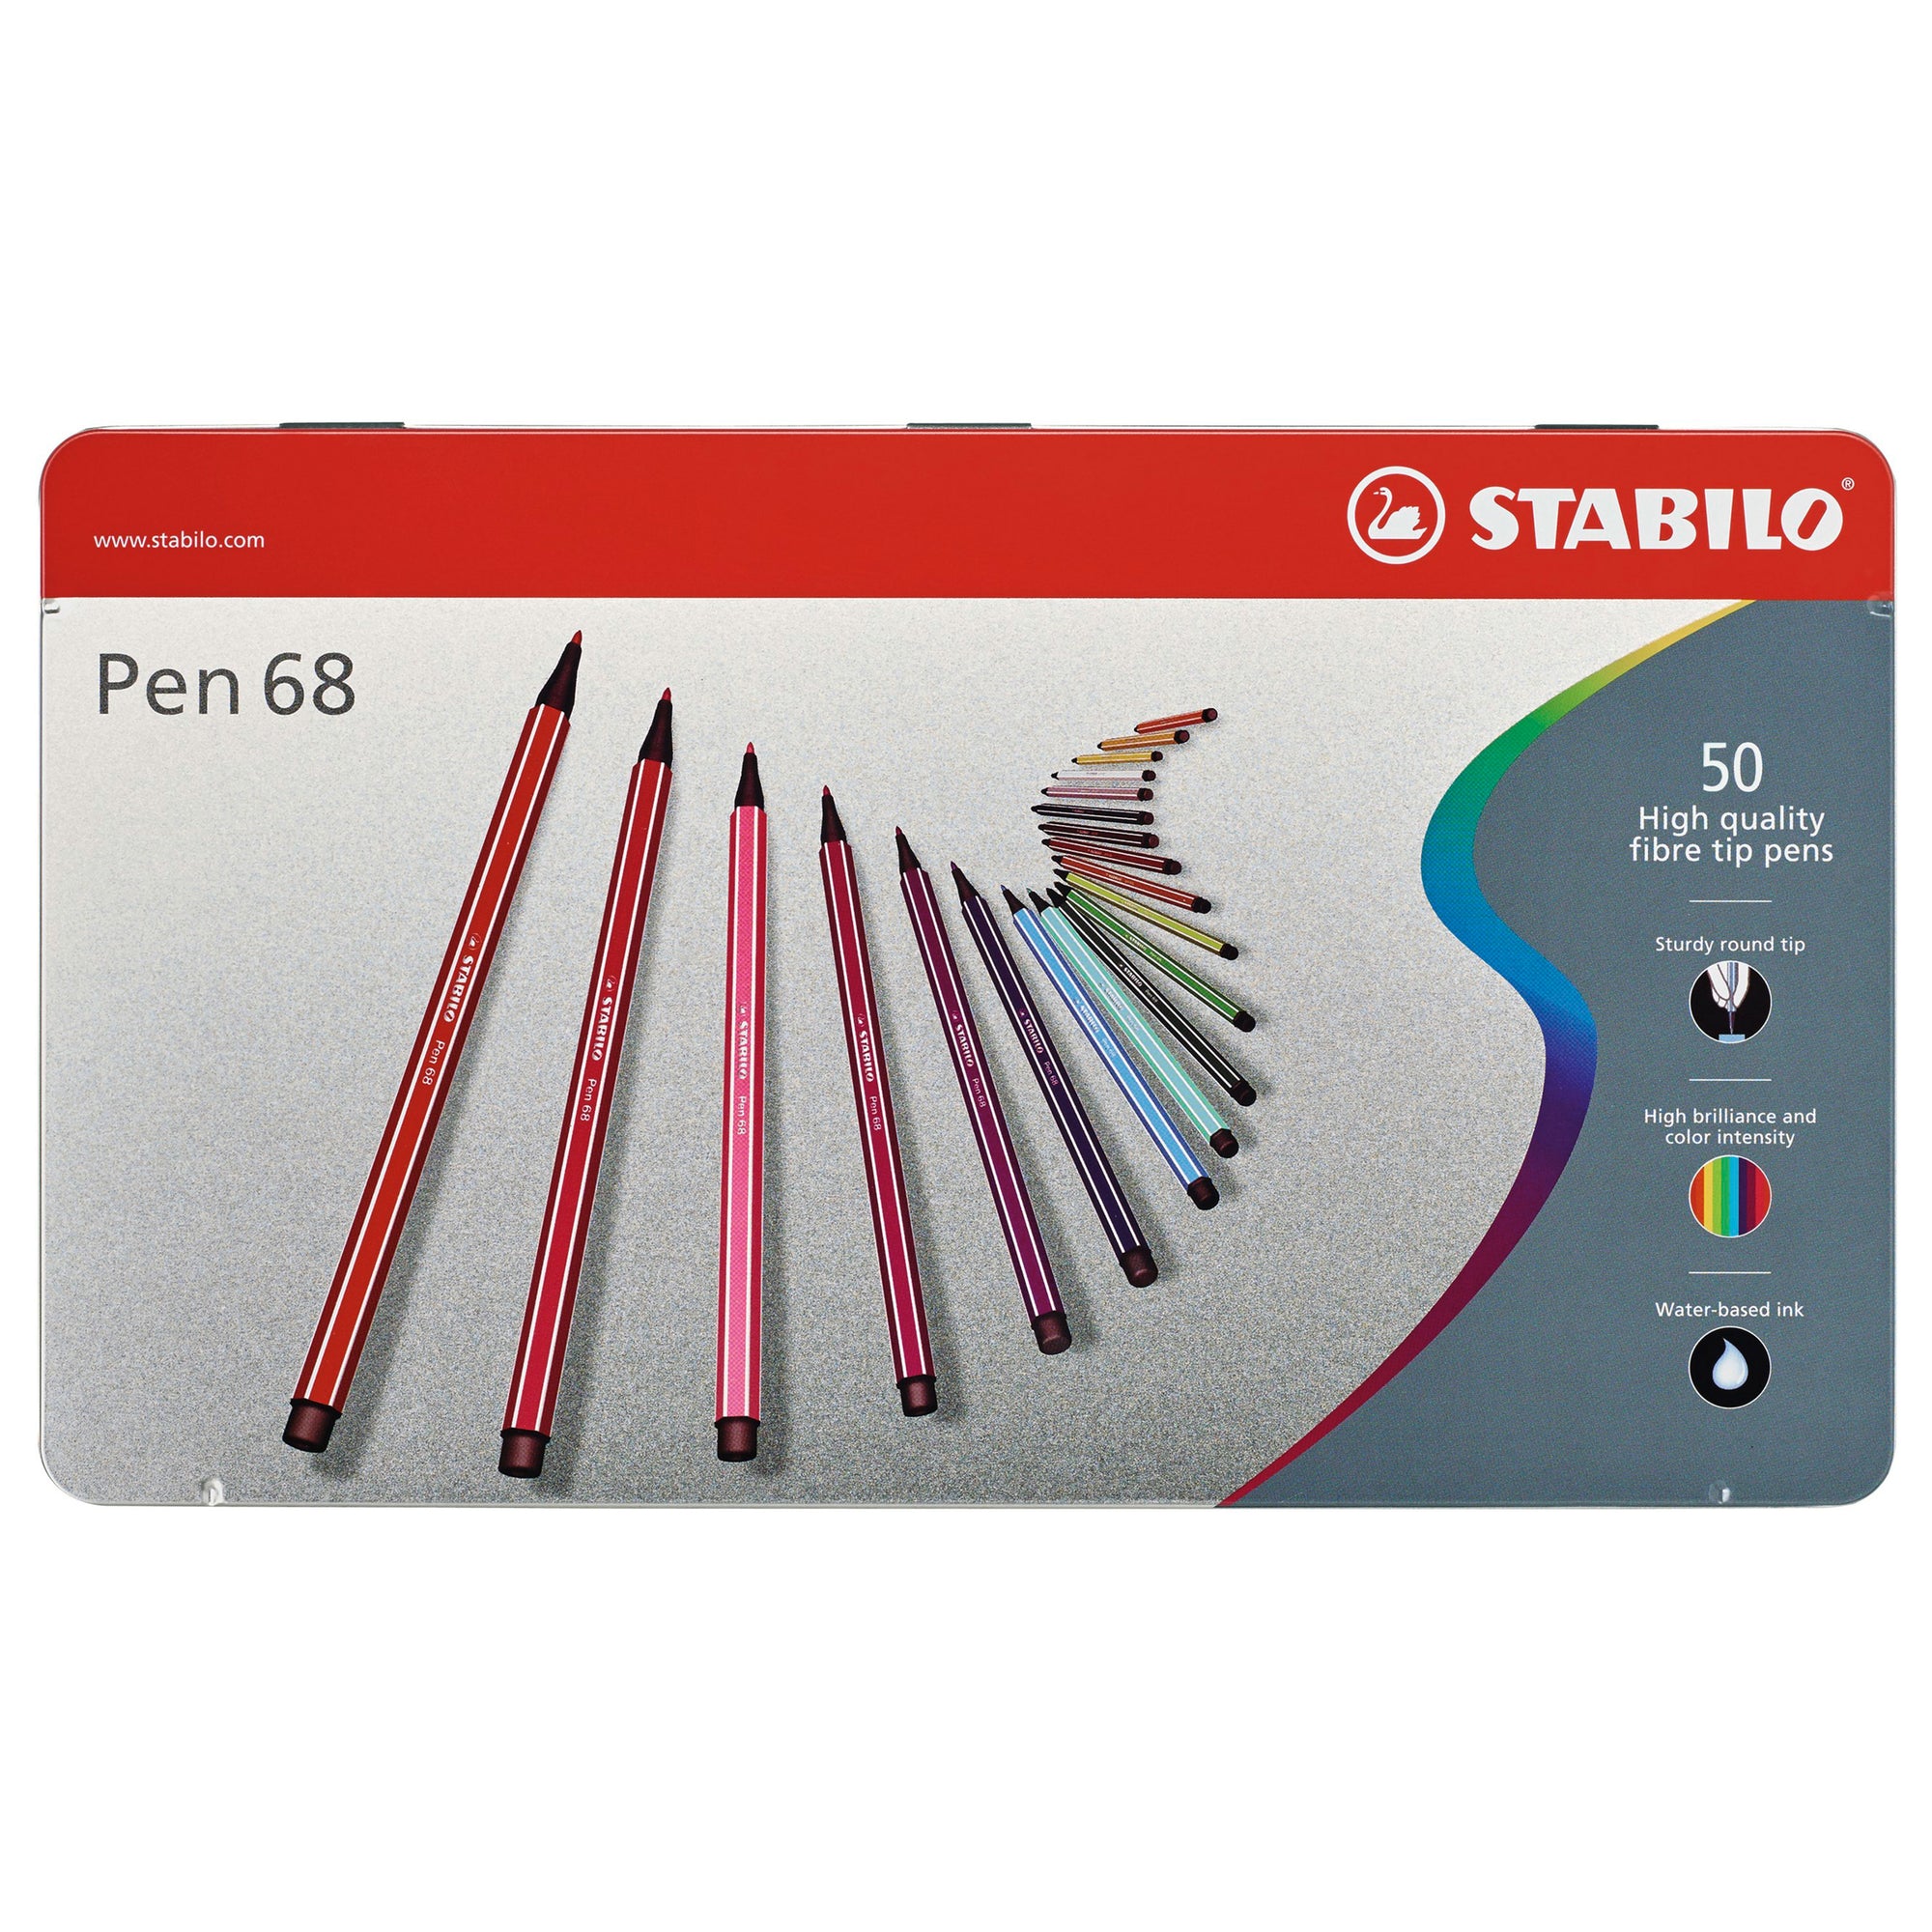 STABILO Pen 68 Metal Box of 50 assorted colours